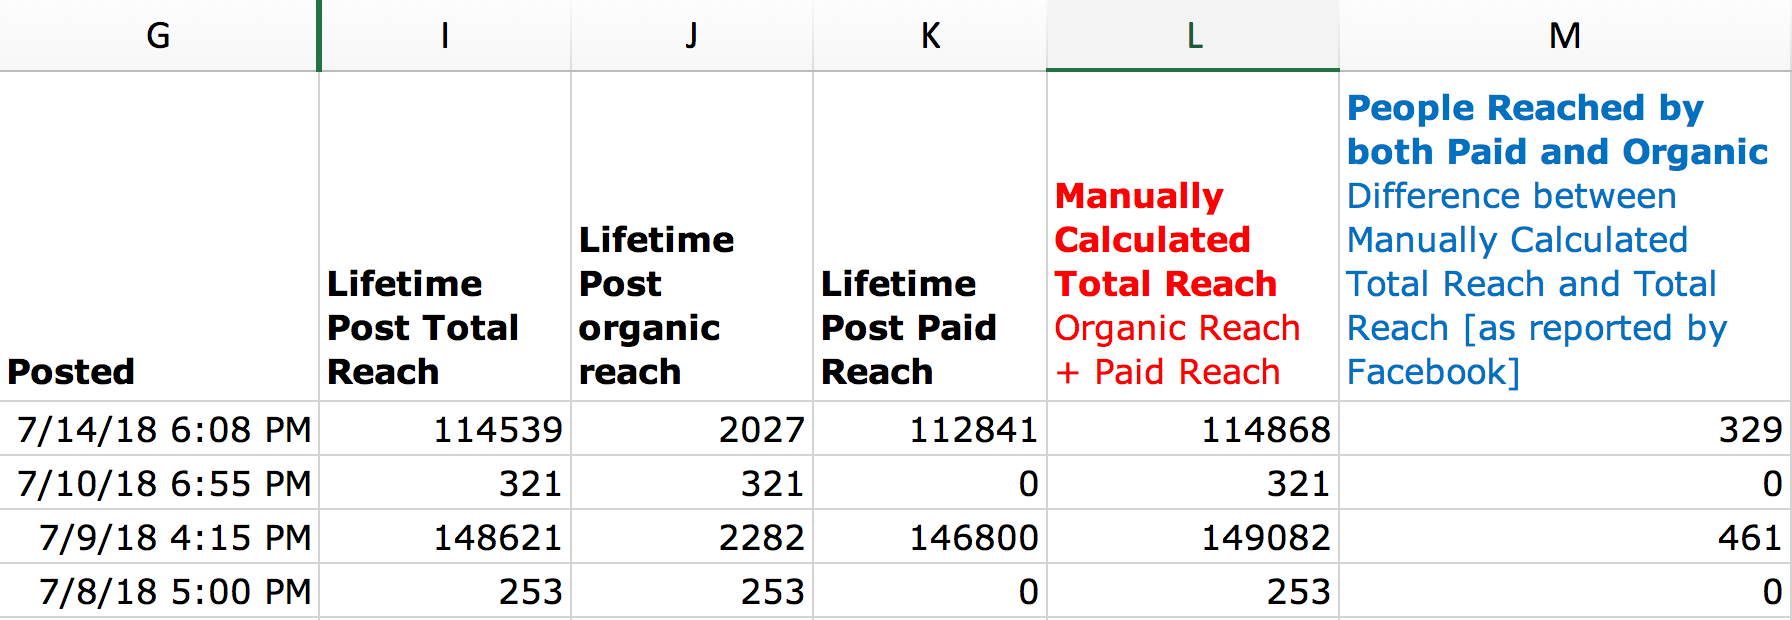 Facebook Post Reach - Export Example with Manual Calculations